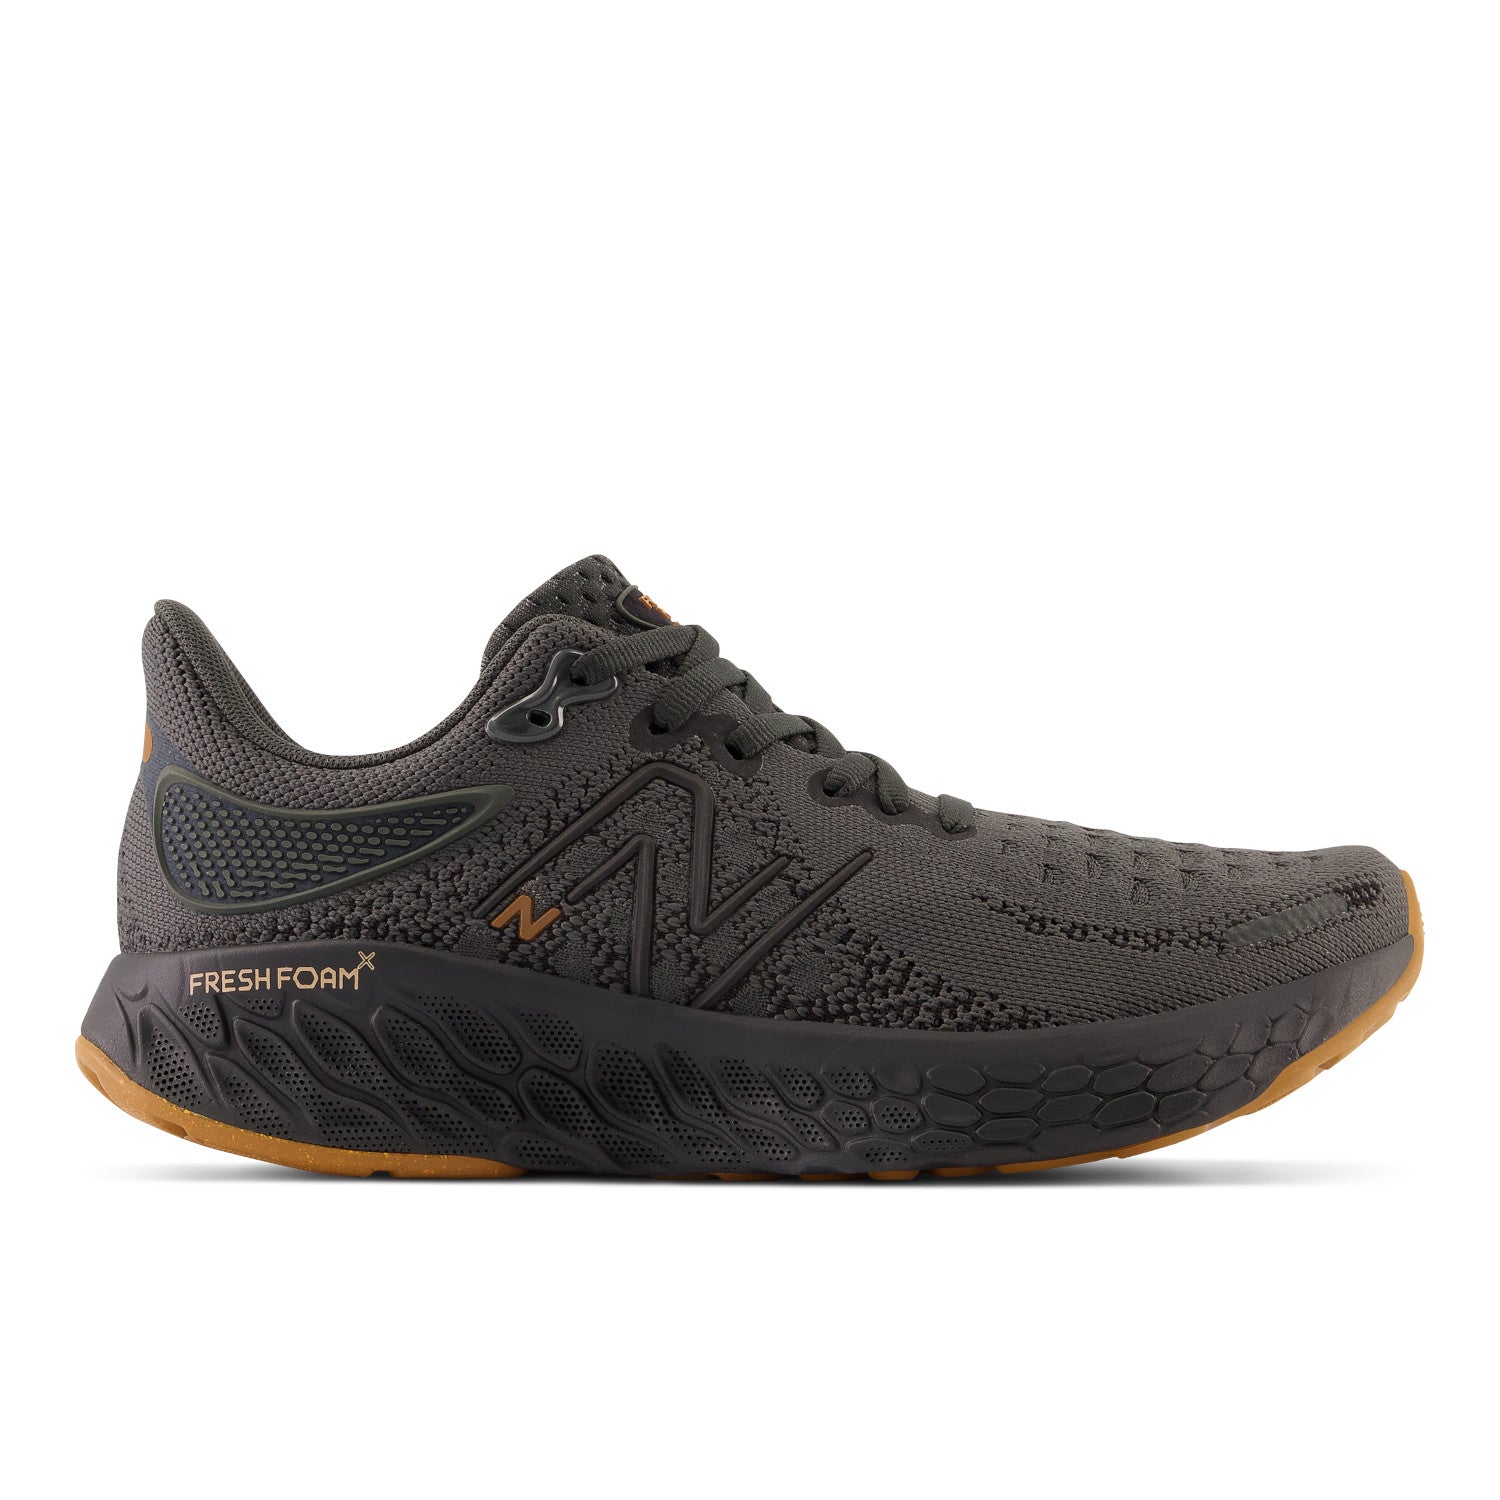 Women's New Balance Fresh Foam X 1080v12 Lounge Around Color: Blacktop with Black and Copper Metallic